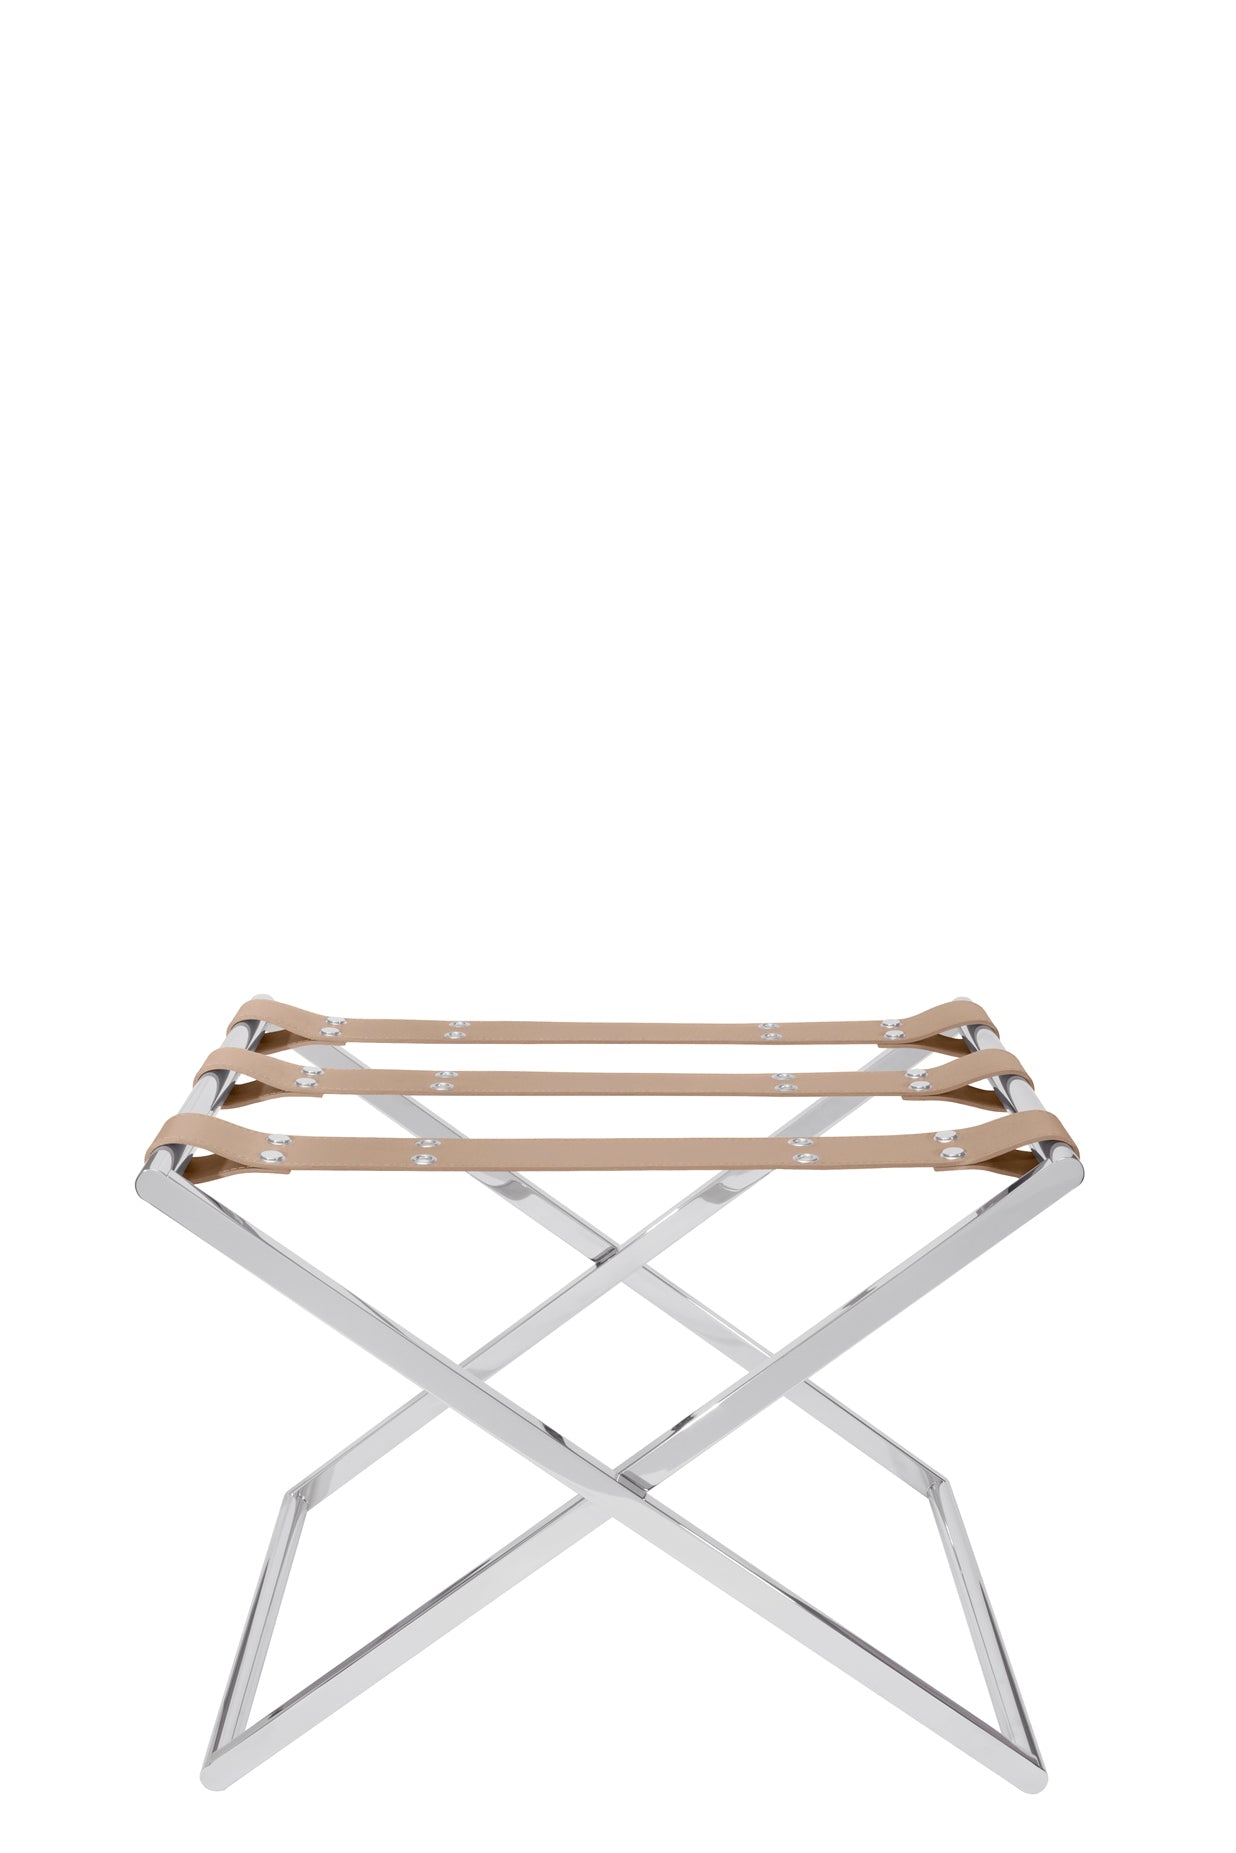 Sibari Luggage Rack by Riviere | Folding luggage rack with three leather straps. Chrome or gold metal legs with adjustable height. | Furniture and Luggage Accessories | 2Jour Concierge, your luxury lifestyle shop